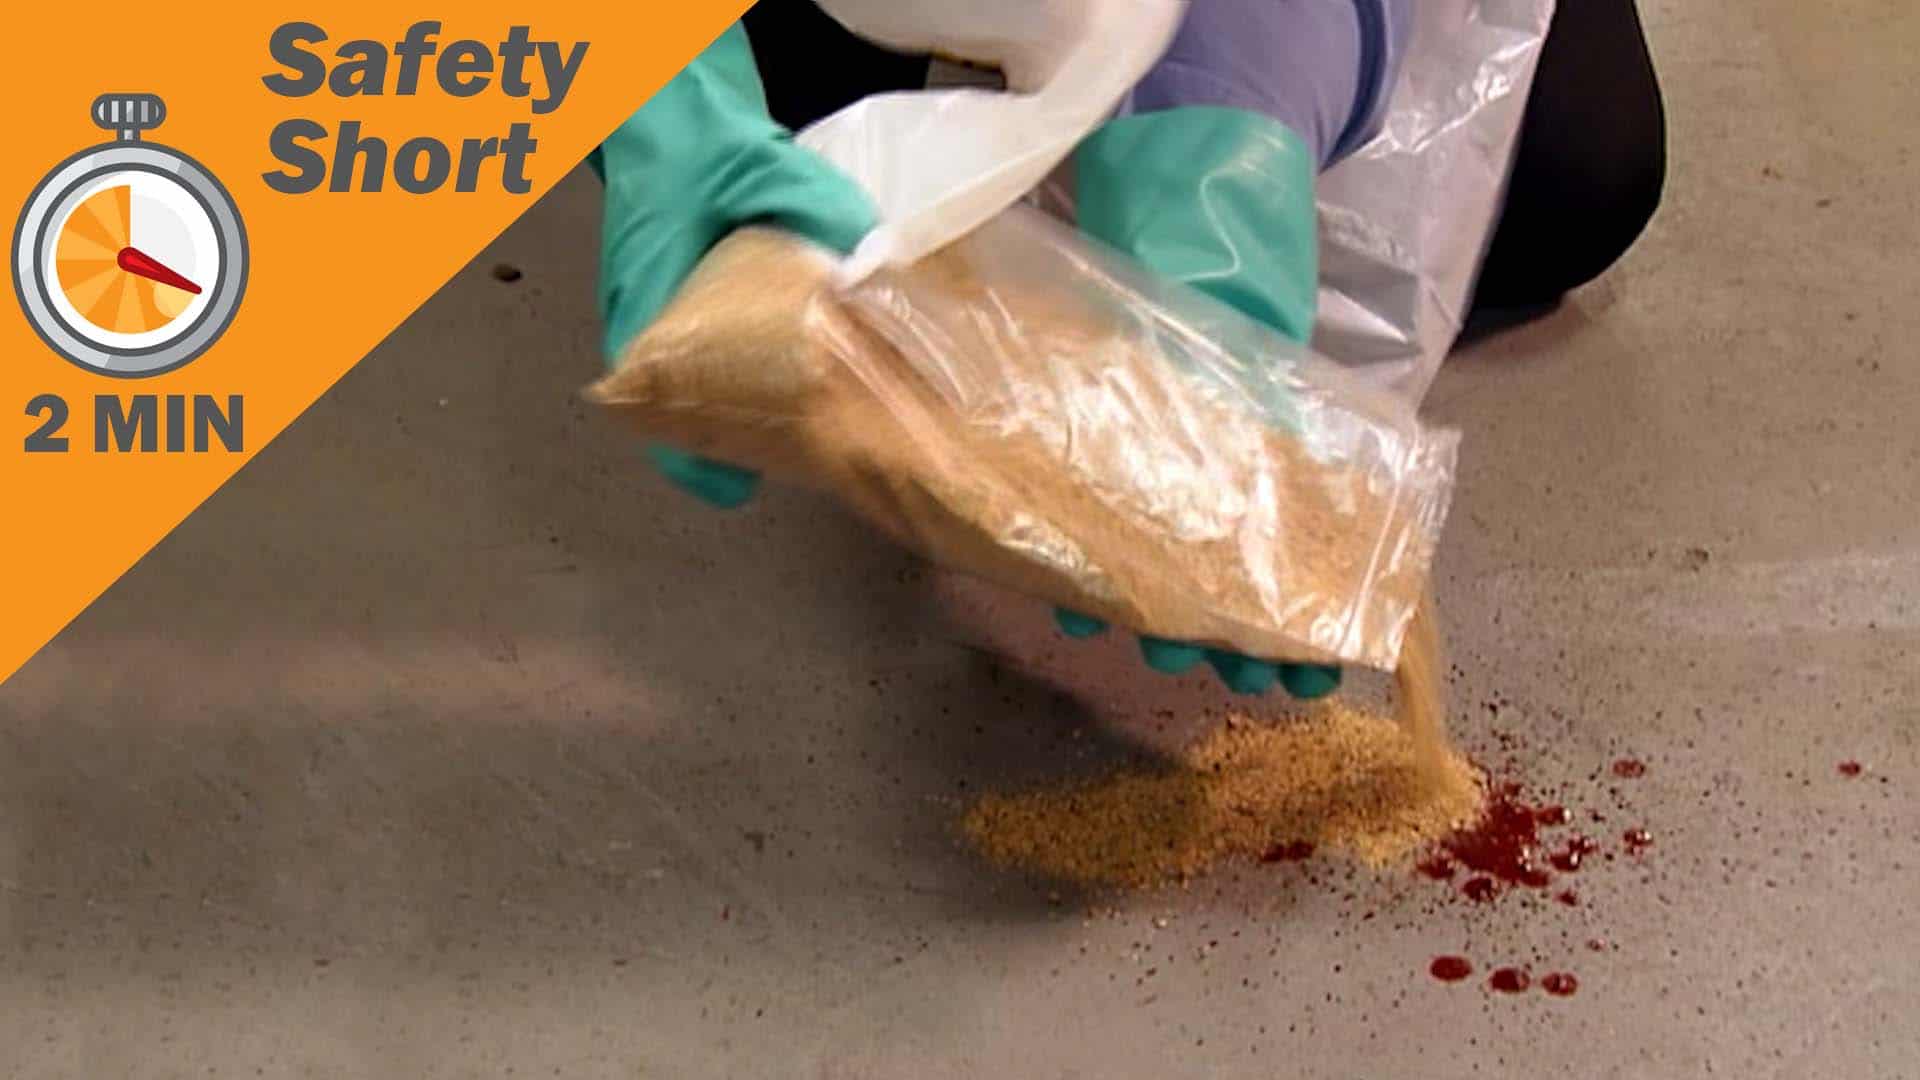 How to clean up Blood and Body Fluid Spills - safety training online